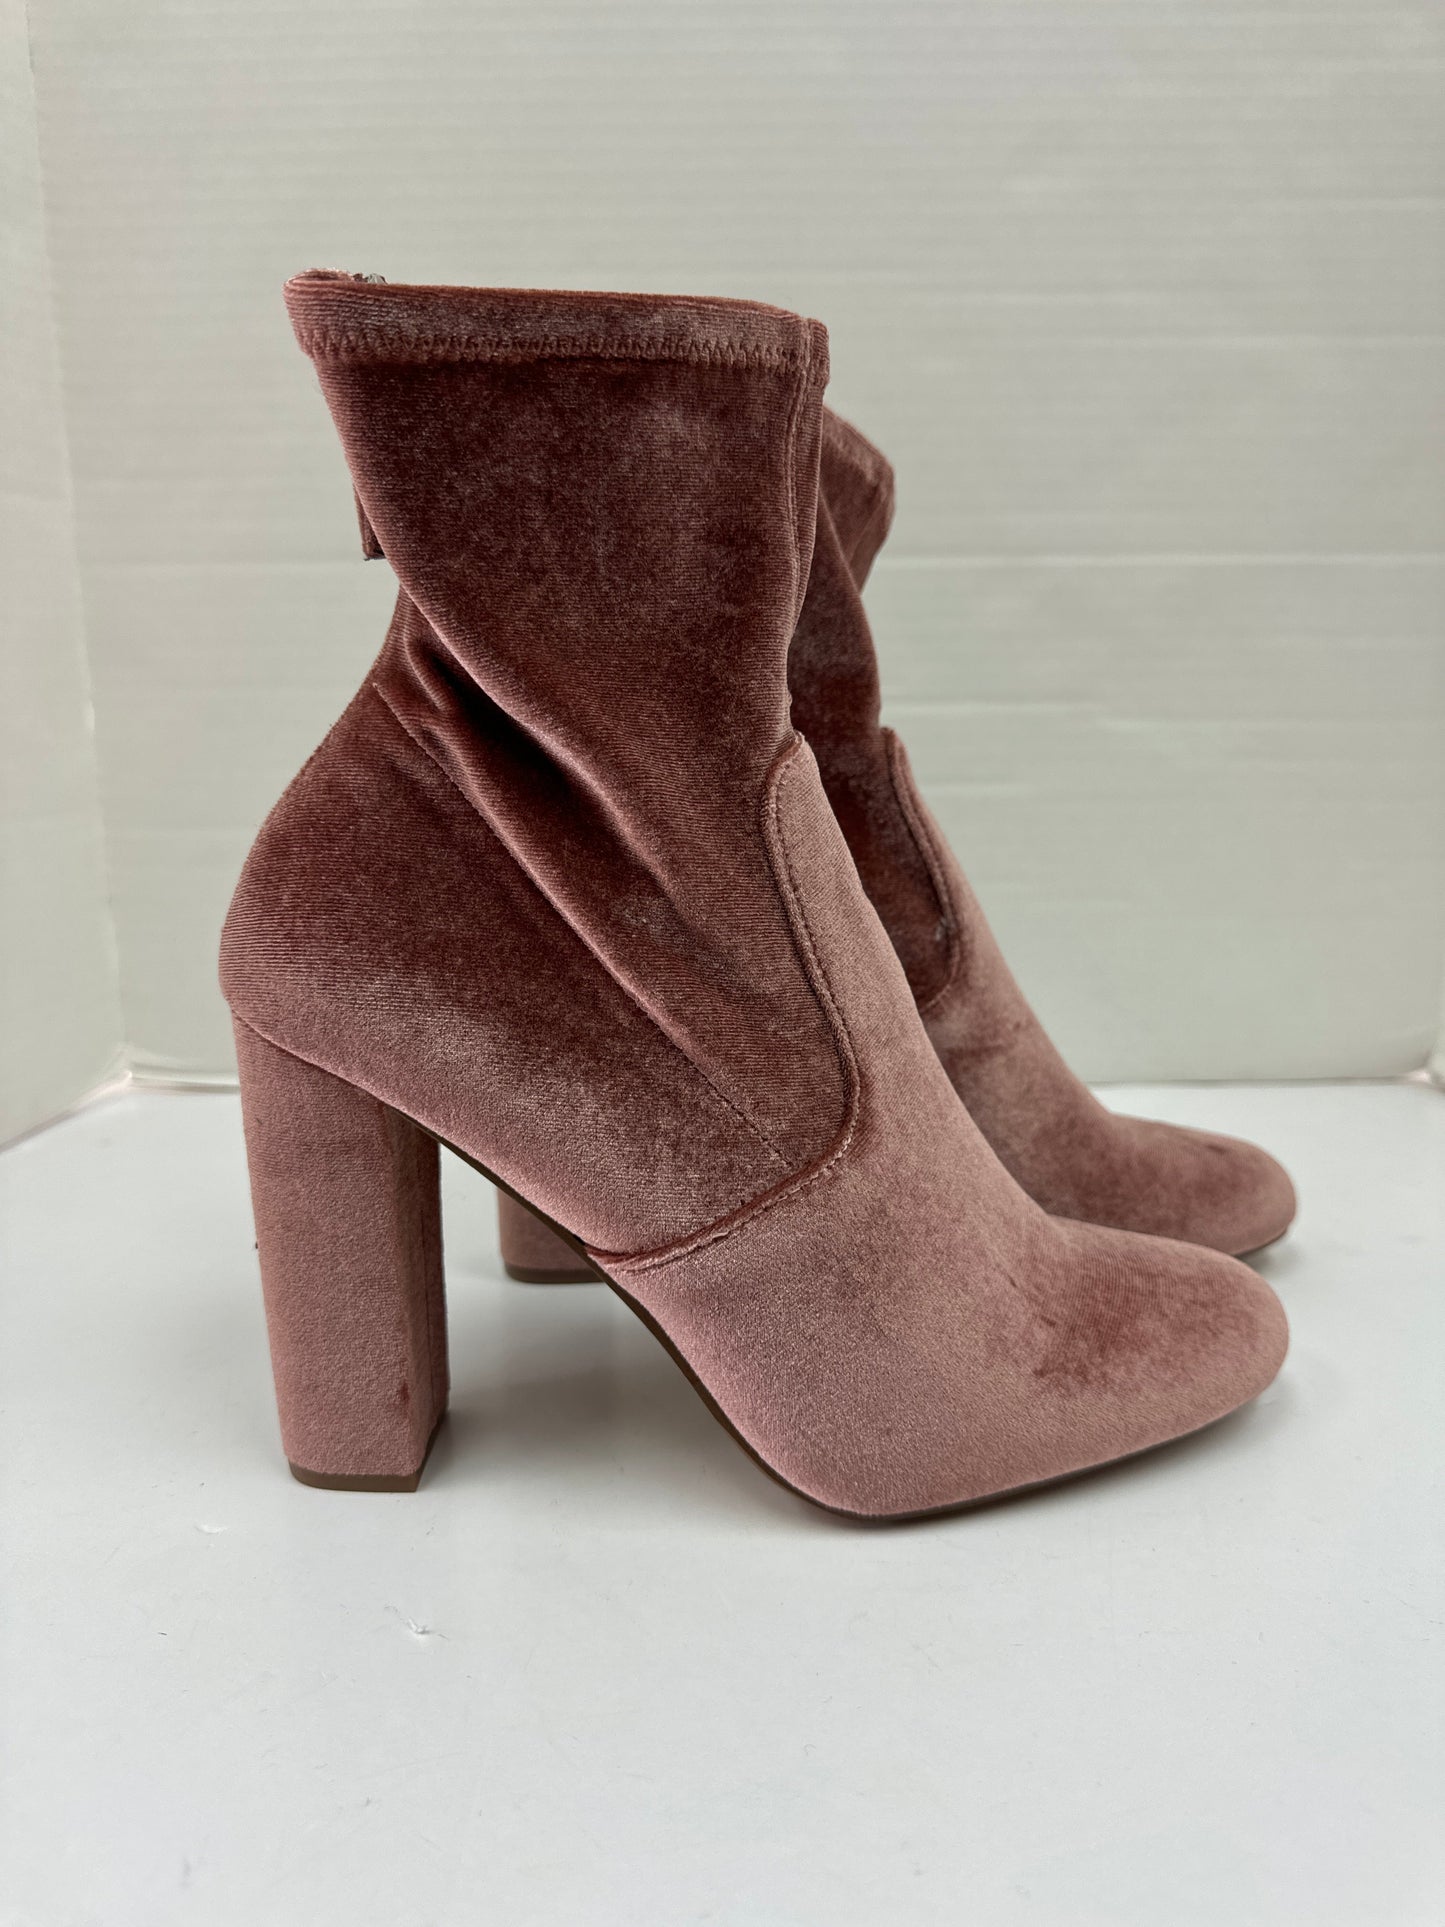 Pink Boots Ankle Heels Steve Madden, Size 10